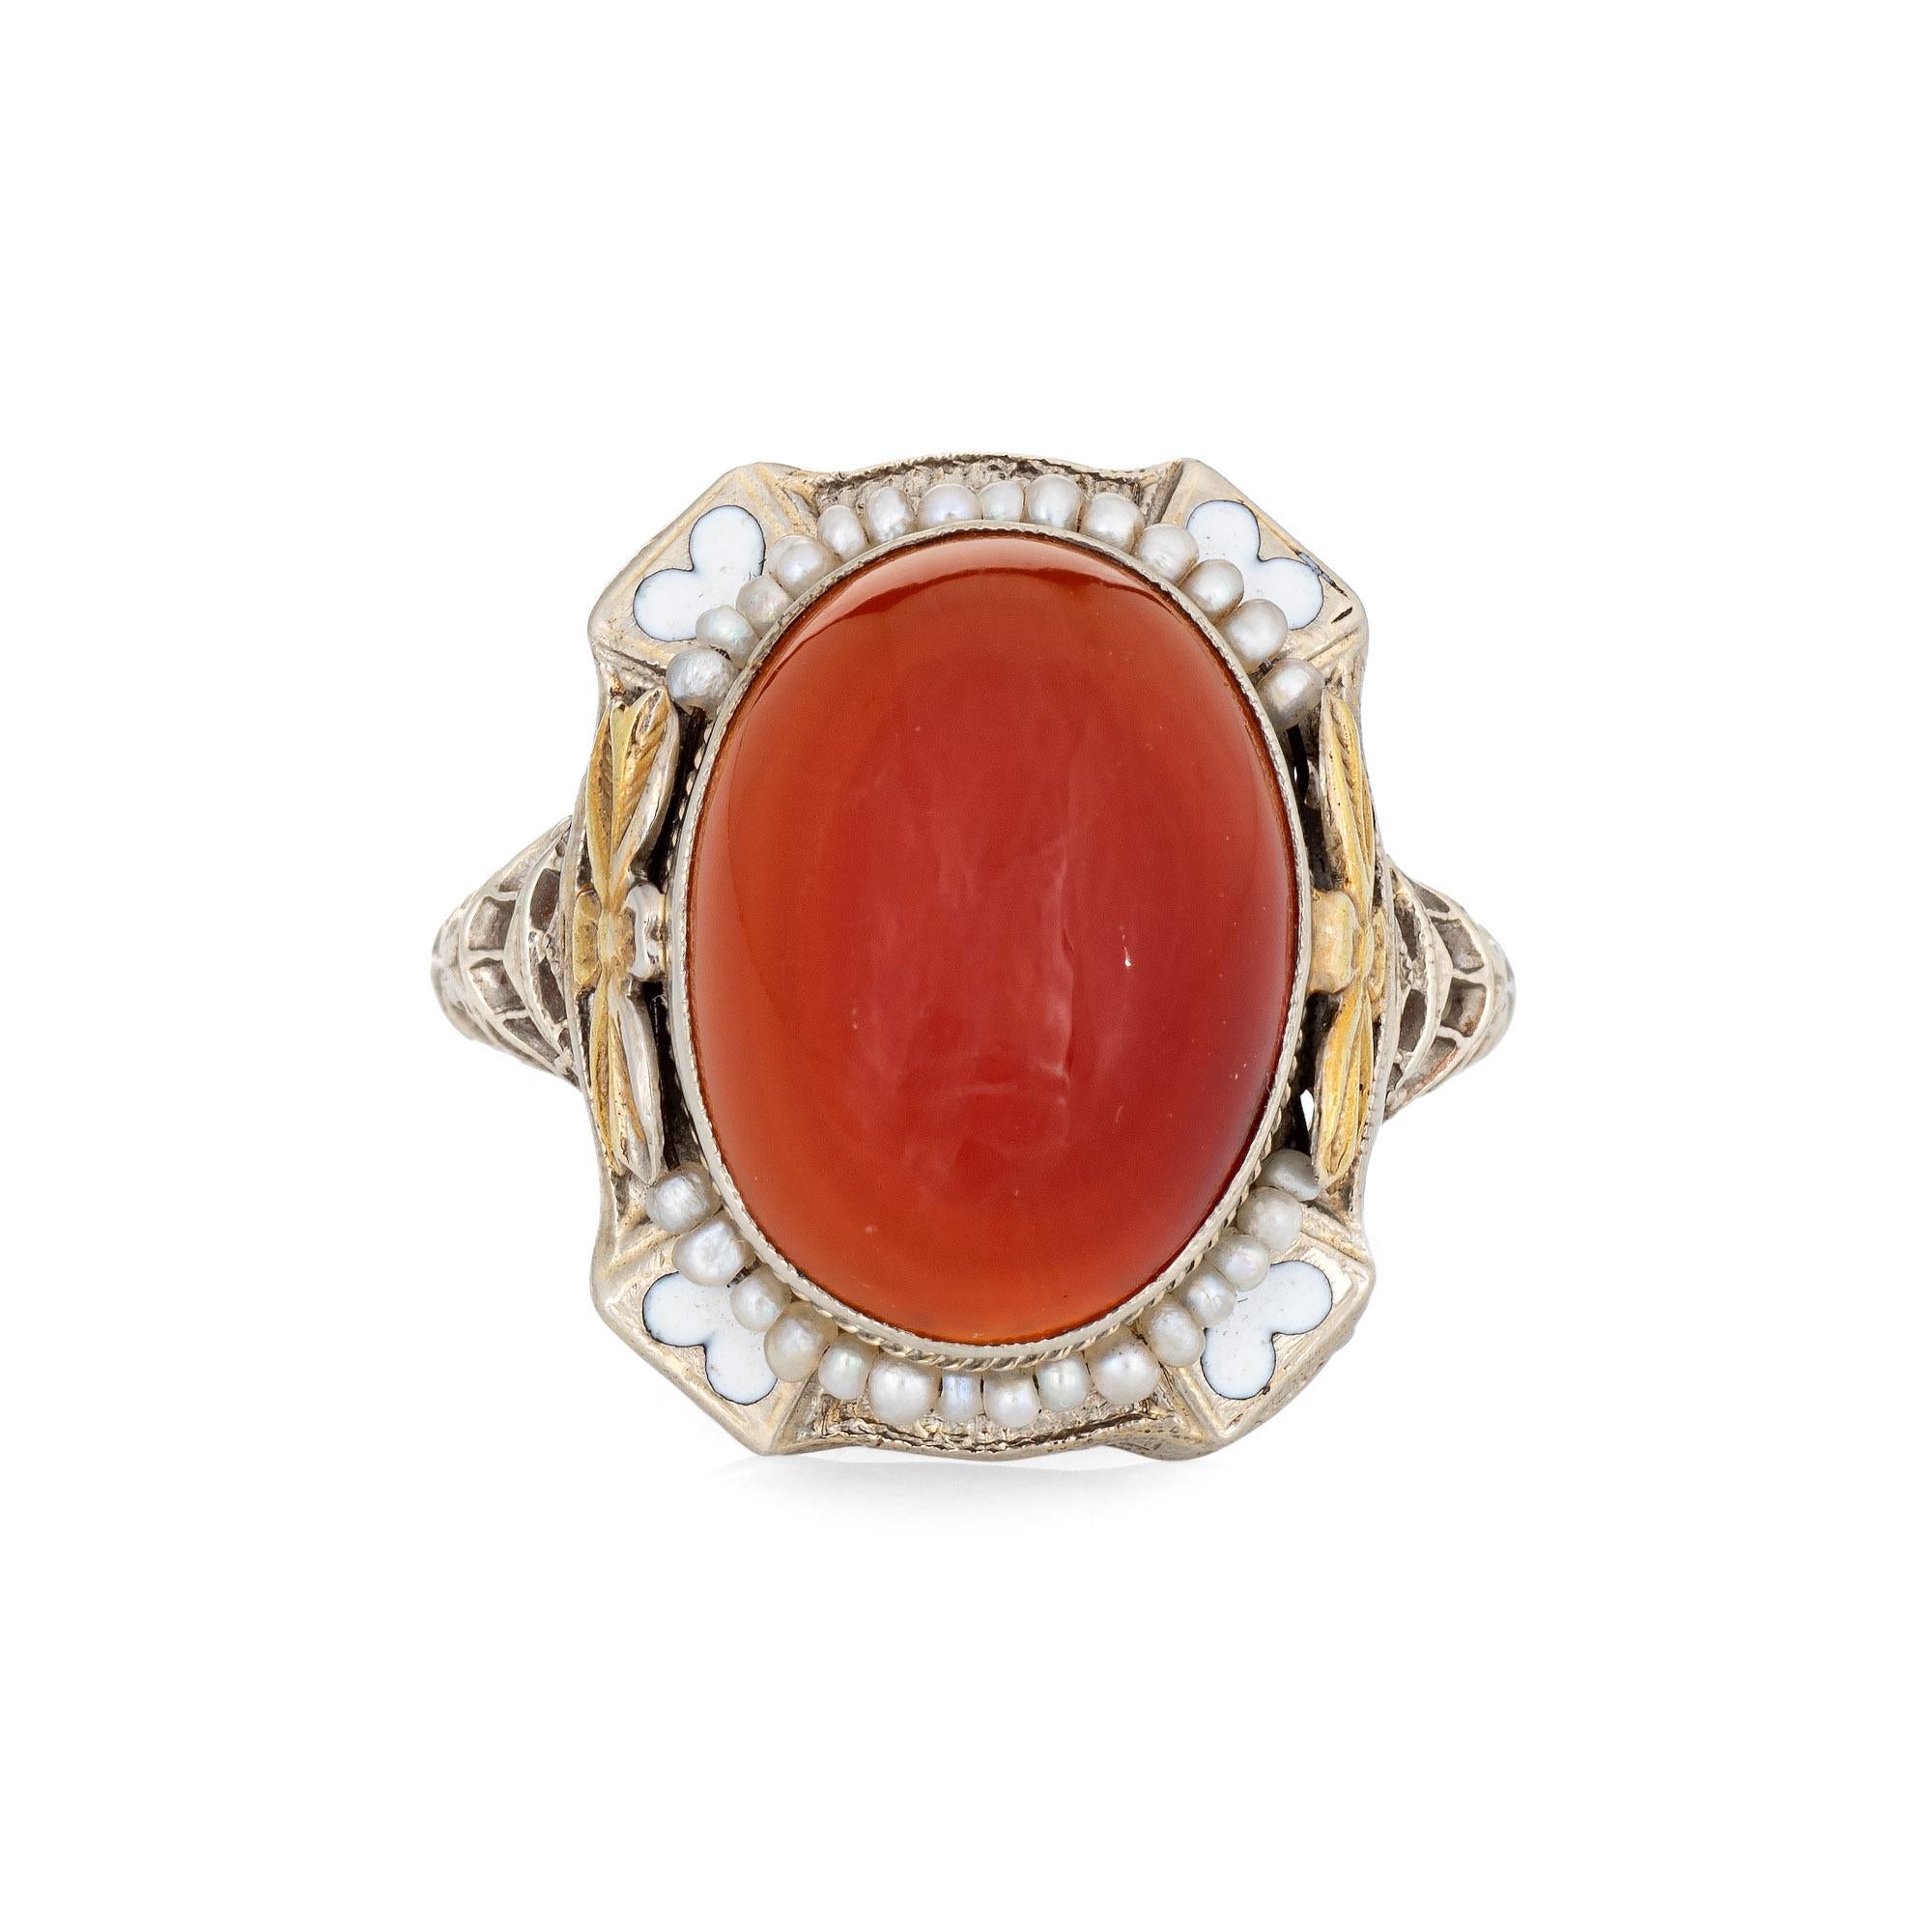 Elegant & finely detailed Art Deco carnelian ring (circa 1920s to 1930s) crafted in 14k white gold. 

Carnelian measures 16mm x 12mm. The carnelian is in very good condition and free of cracks or chips.     

The ring epitomizes vintage charm with a